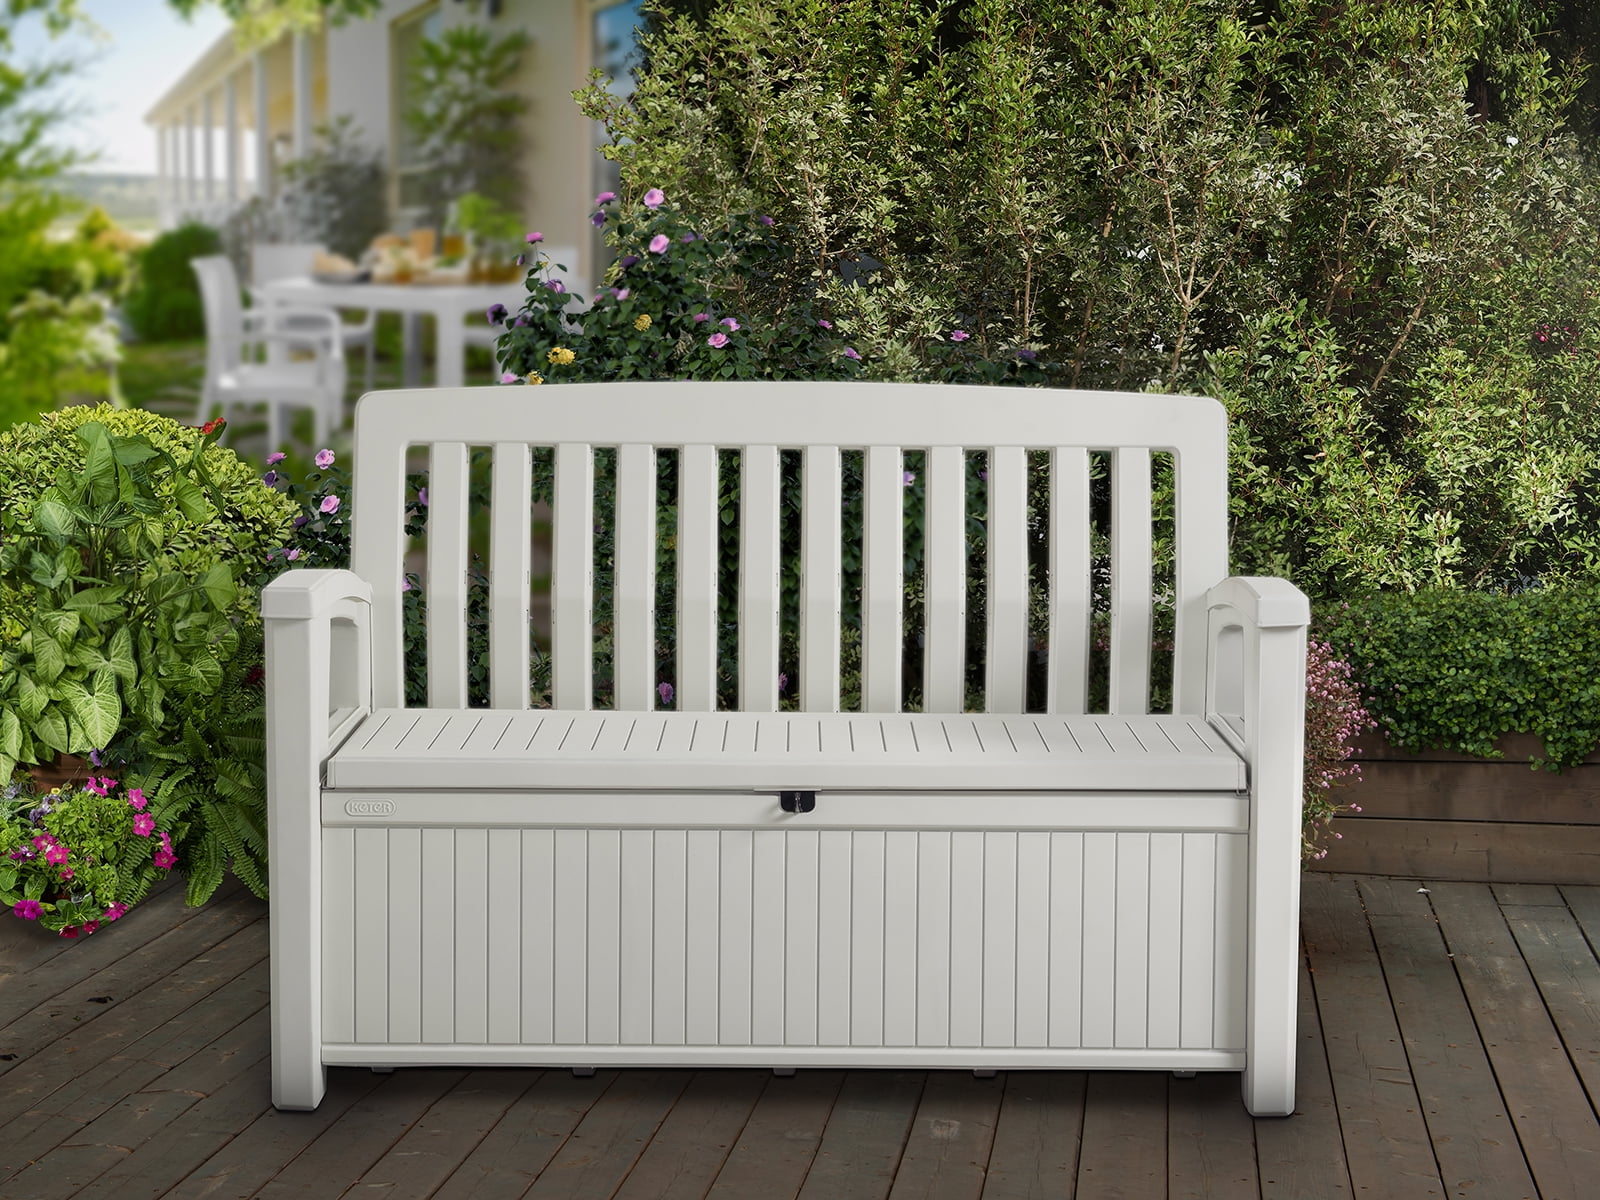 Keter Outdoor Storage Resin Bench, White Outdoor Patio Bench With Storage